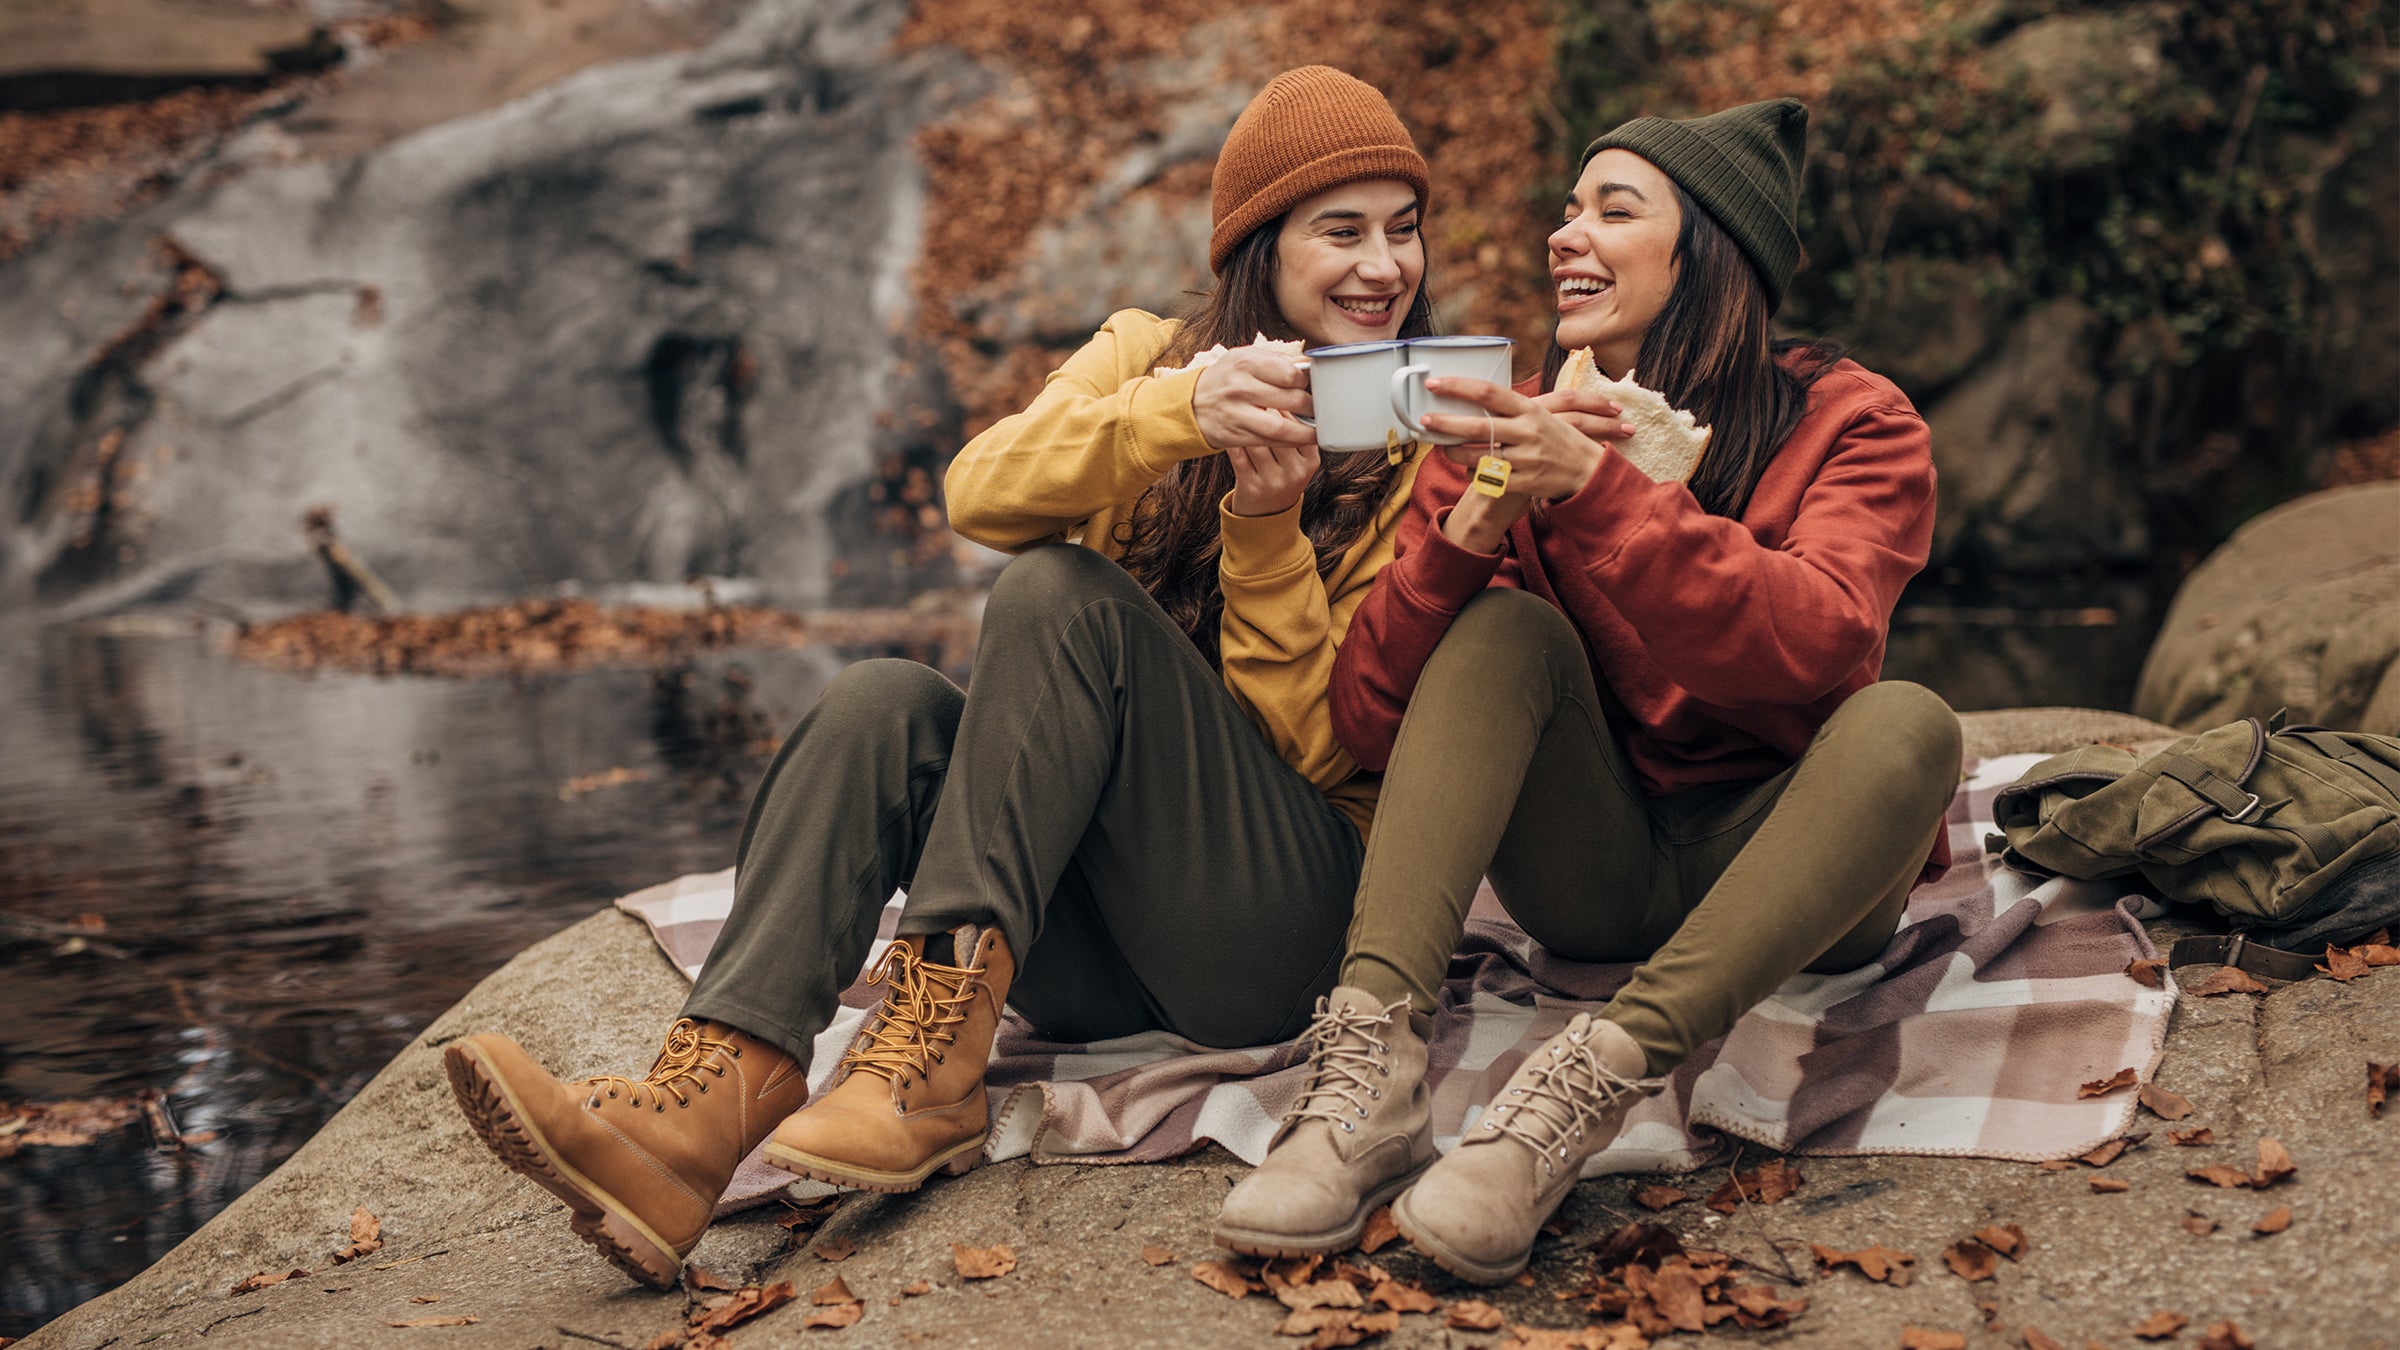 Cozy Camp Gear For Sleeping Outside This Fall